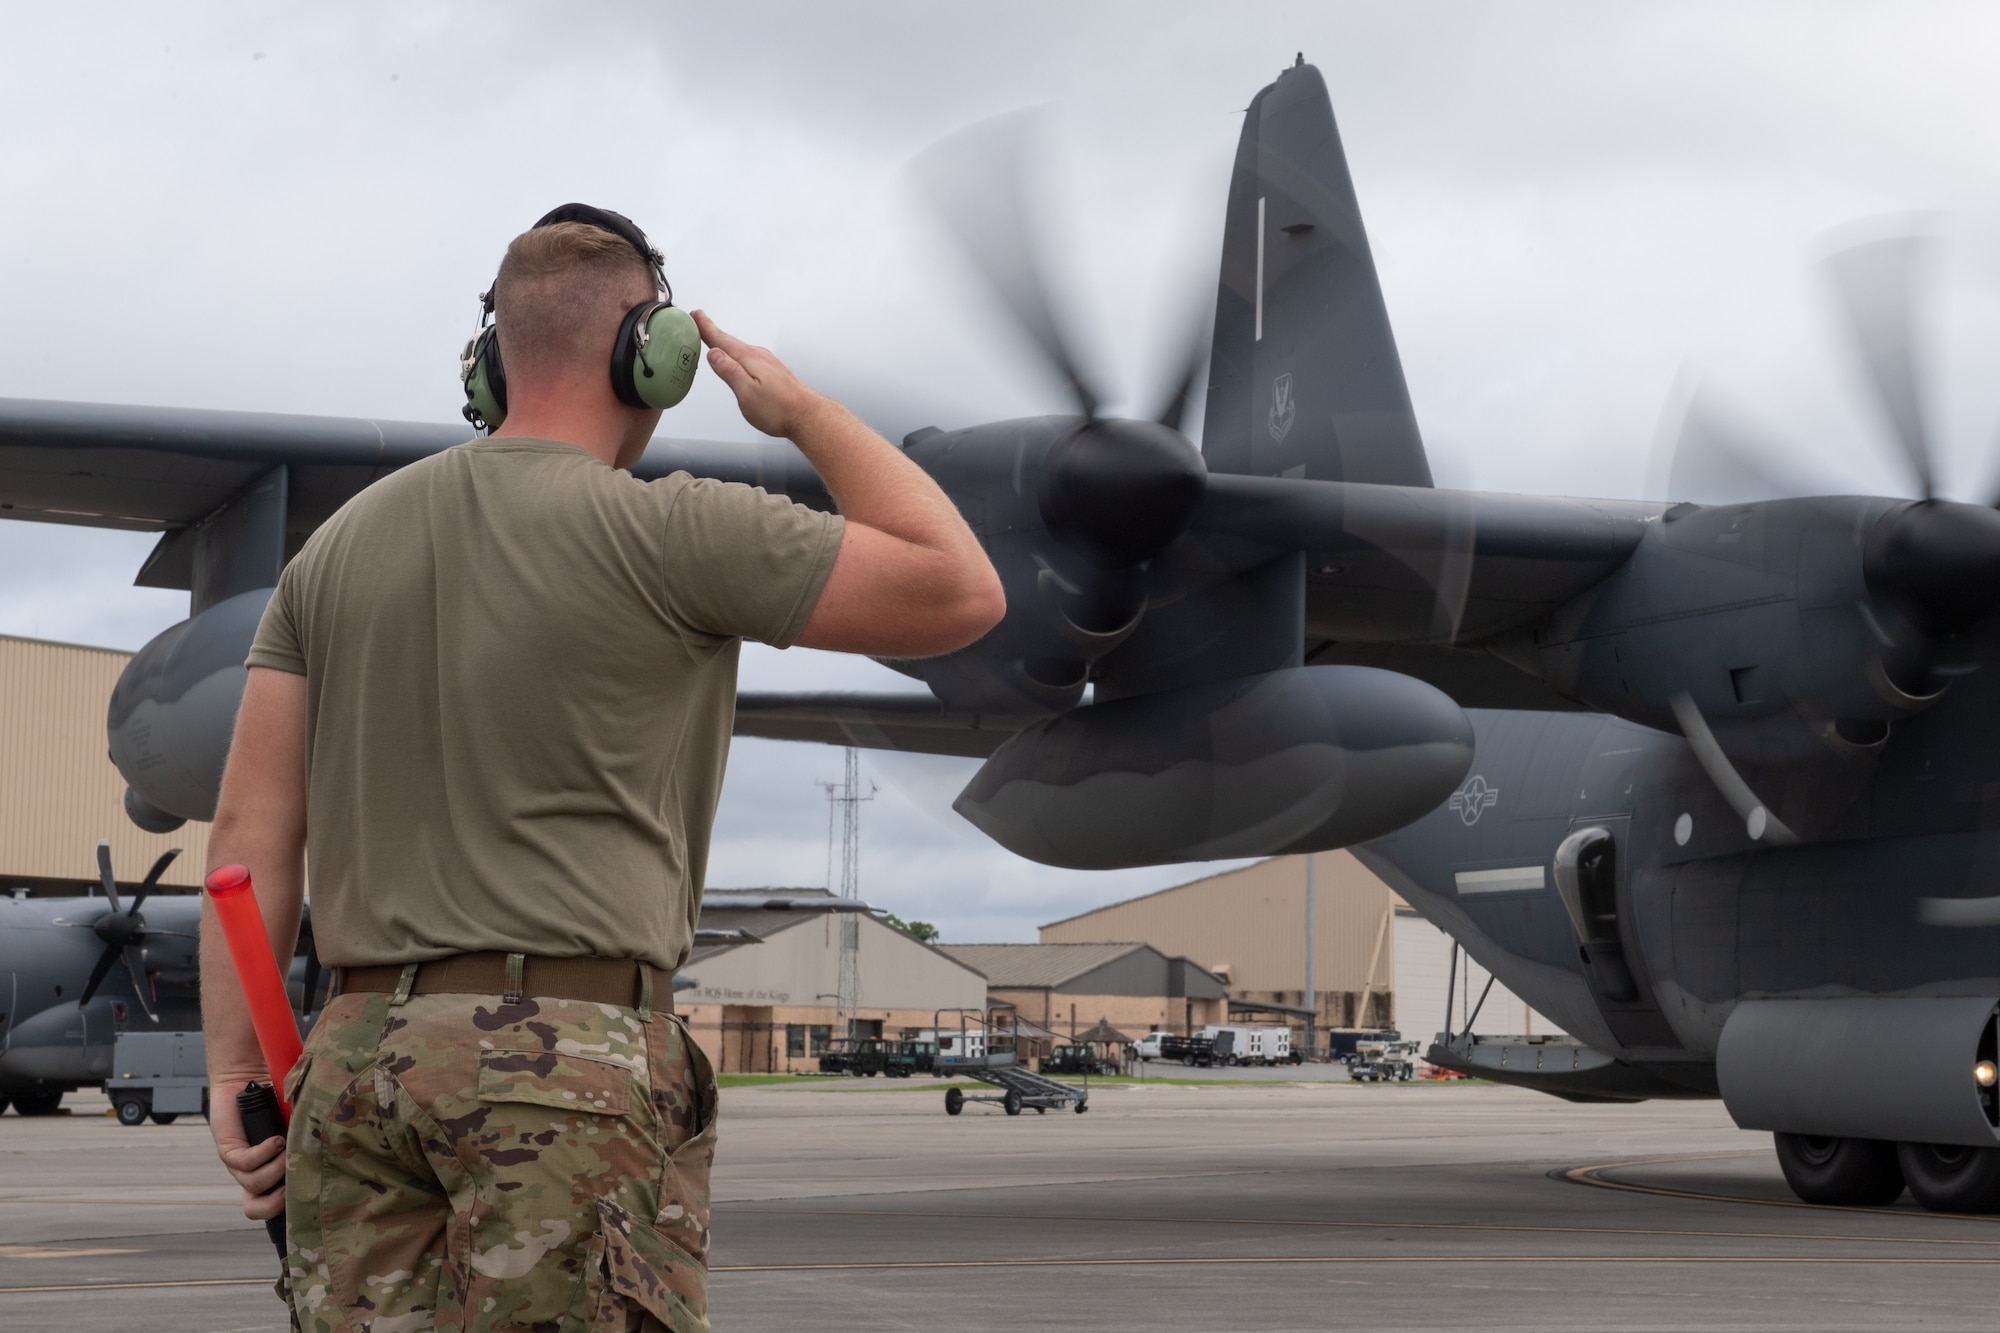 U.S. Air Force Senior Airman Clark Ivey, 71st Rescue Generation Squadron assistant dedicated crew chief, sends off an HC-130J Combat King II for its Black Letter flight on July 12, 2022, at Moody Air Force Base, Georgia. In honor of his achieving a rare, defect-free Black letter flight, Ivey marshalled the aircraft out and rendered the customary salute. (U.S. Air Force photo by Staff Sgt. John Crampton)